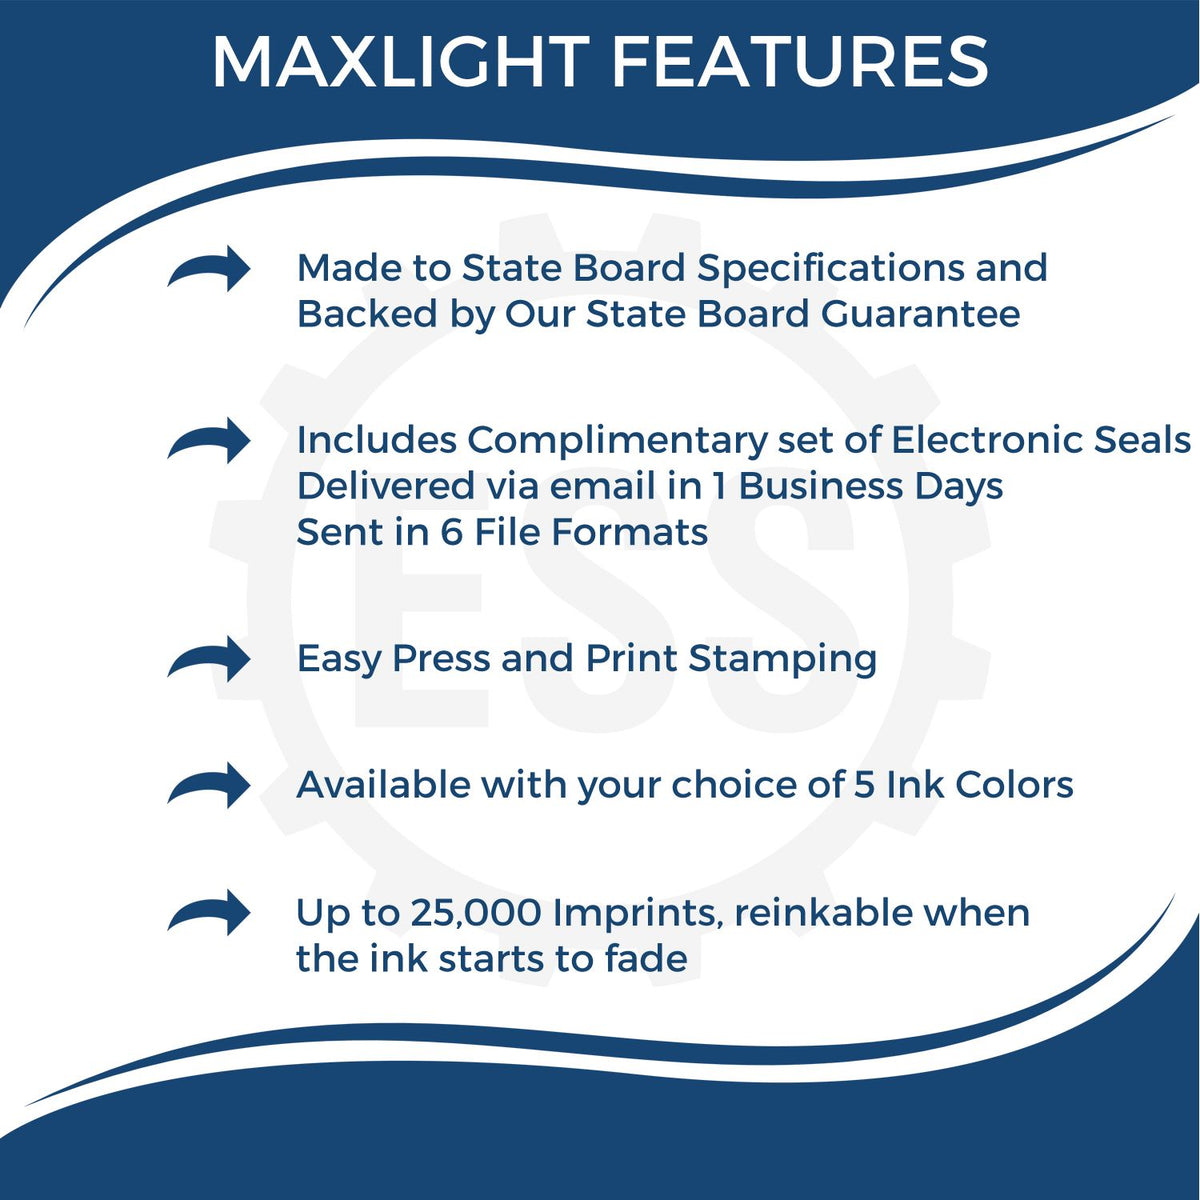 A picture of an infographic highlighting the selling points for the Premium MaxLight Pre-Inked West Virginia Landscape Architectural Stamp